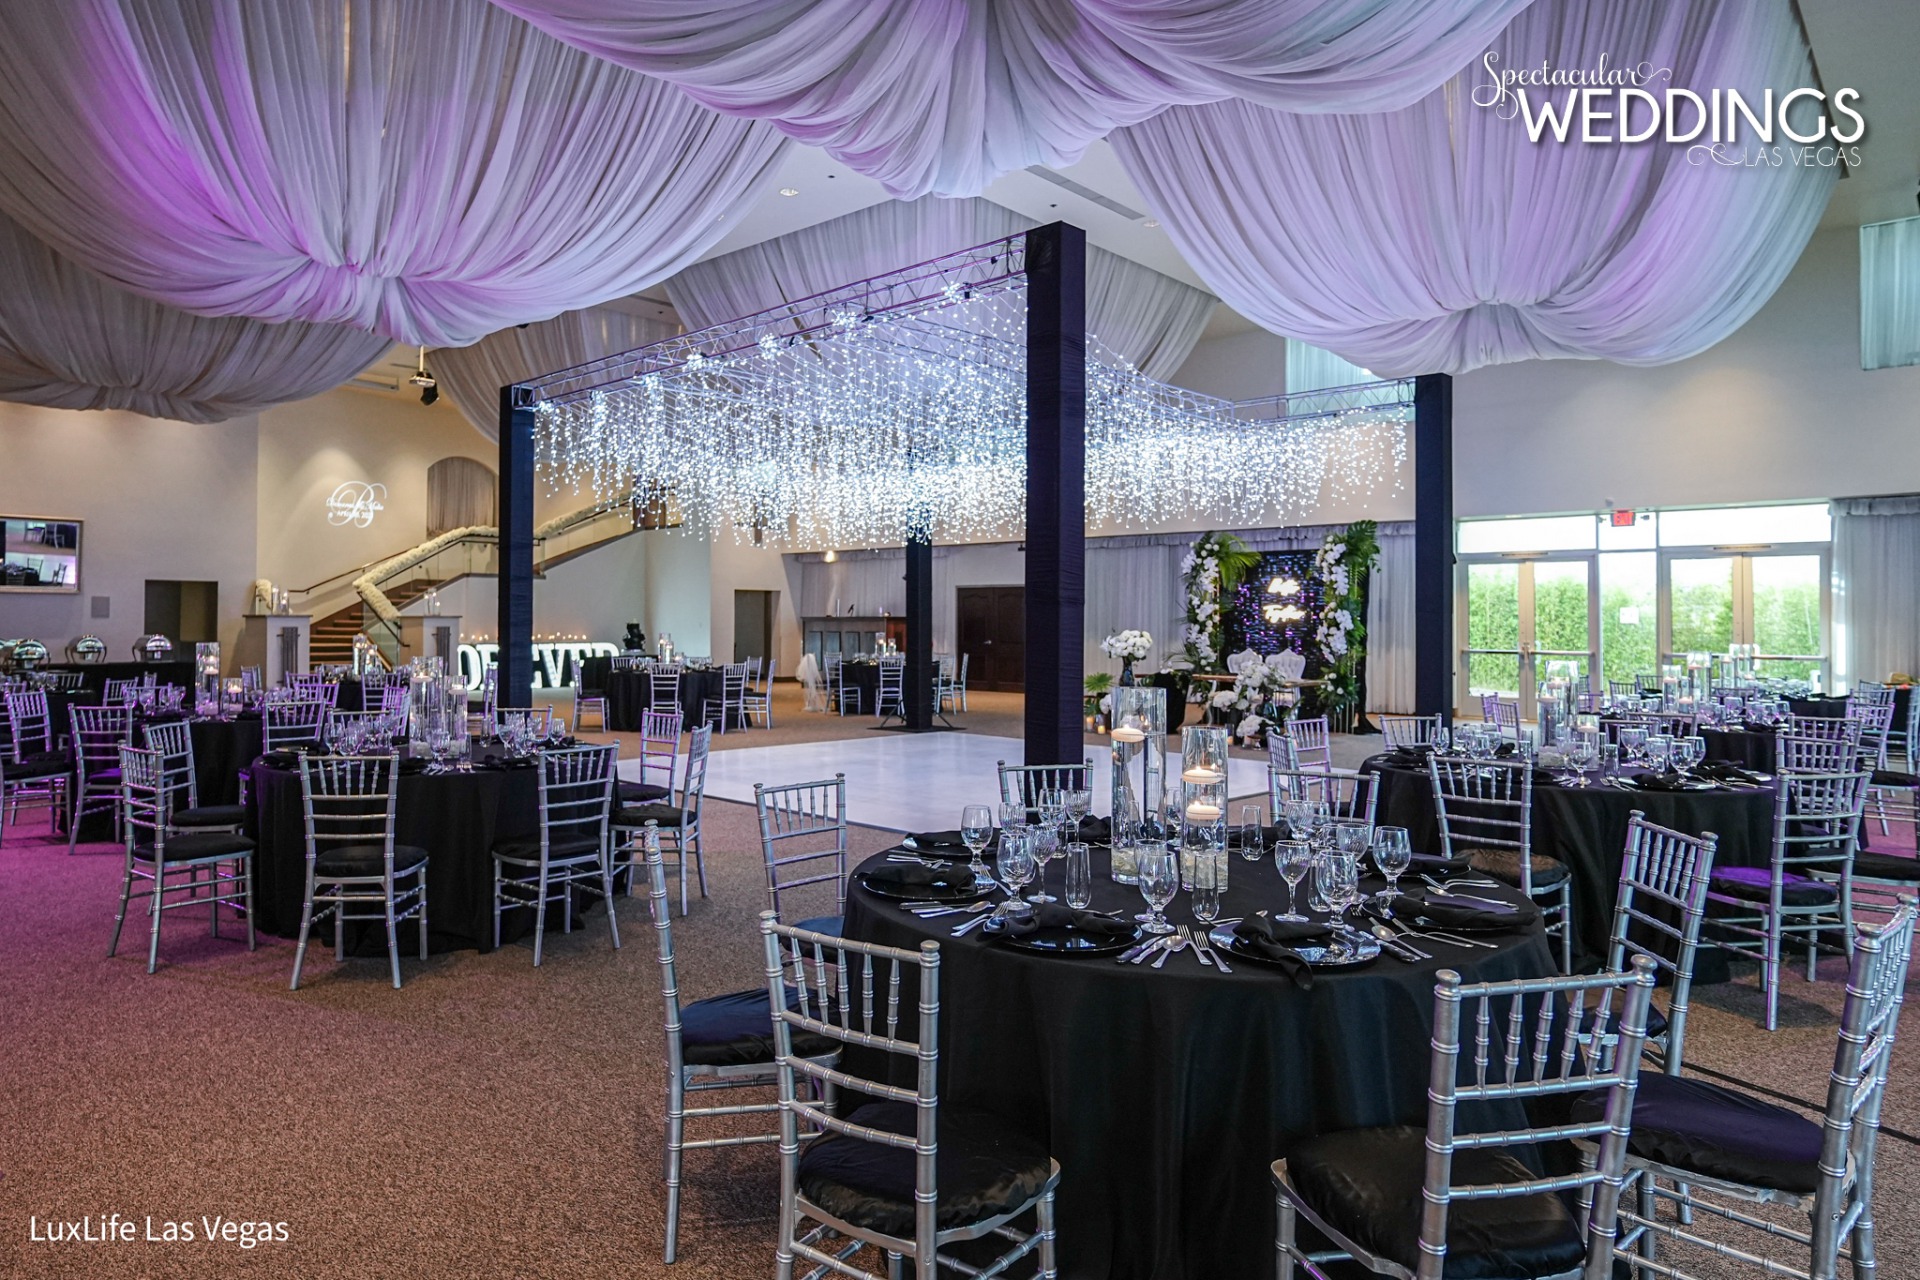 What a space to celebrate your nuptials. A canopy twinkling lights over the dance floor are a perfect space for your first dance surrounded by your family seated at tables with black linens.